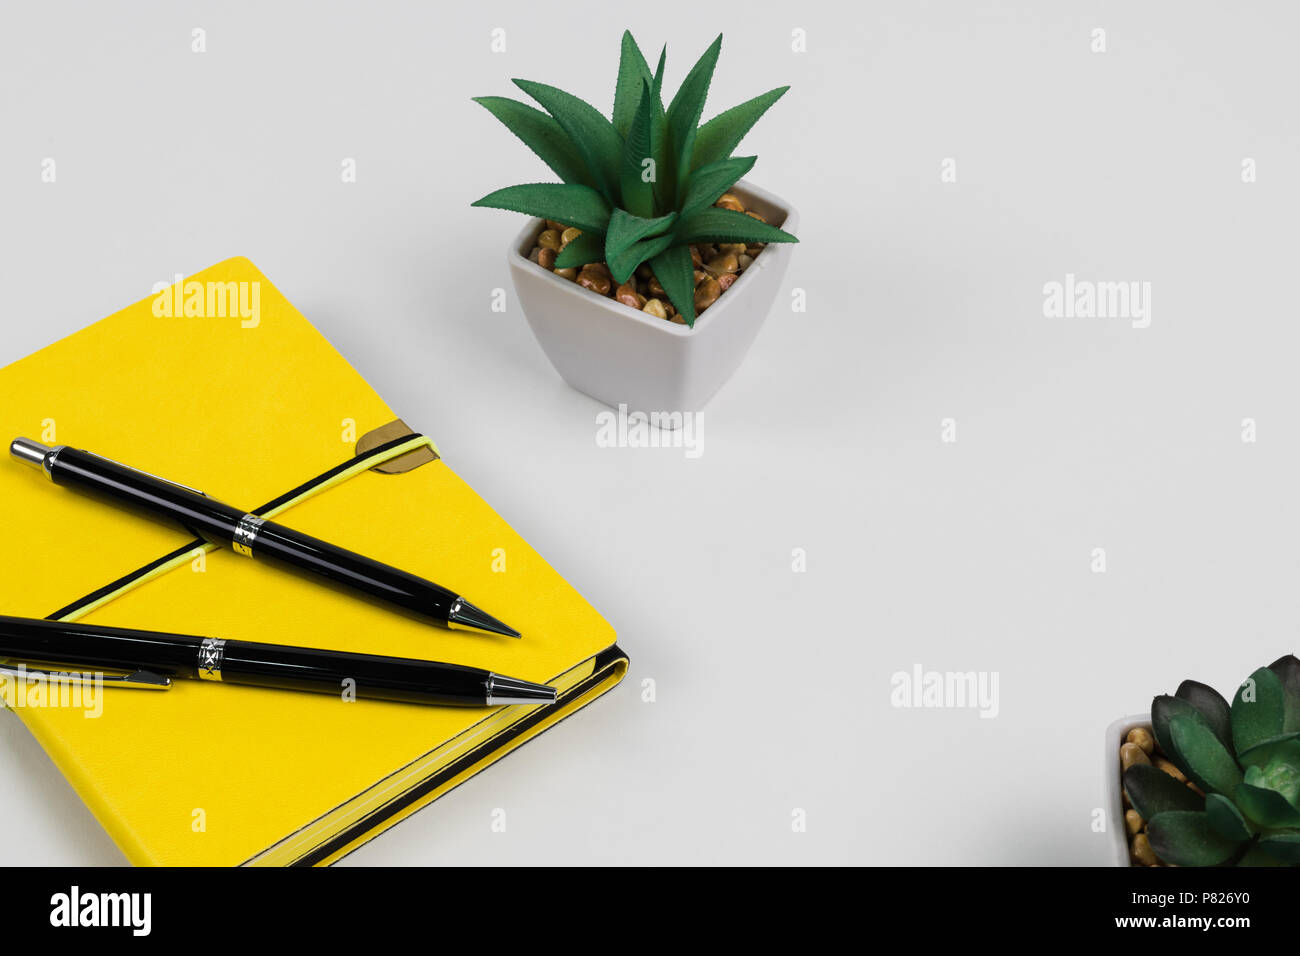 Notebook on Desk with Succulent Plant Stock Photo